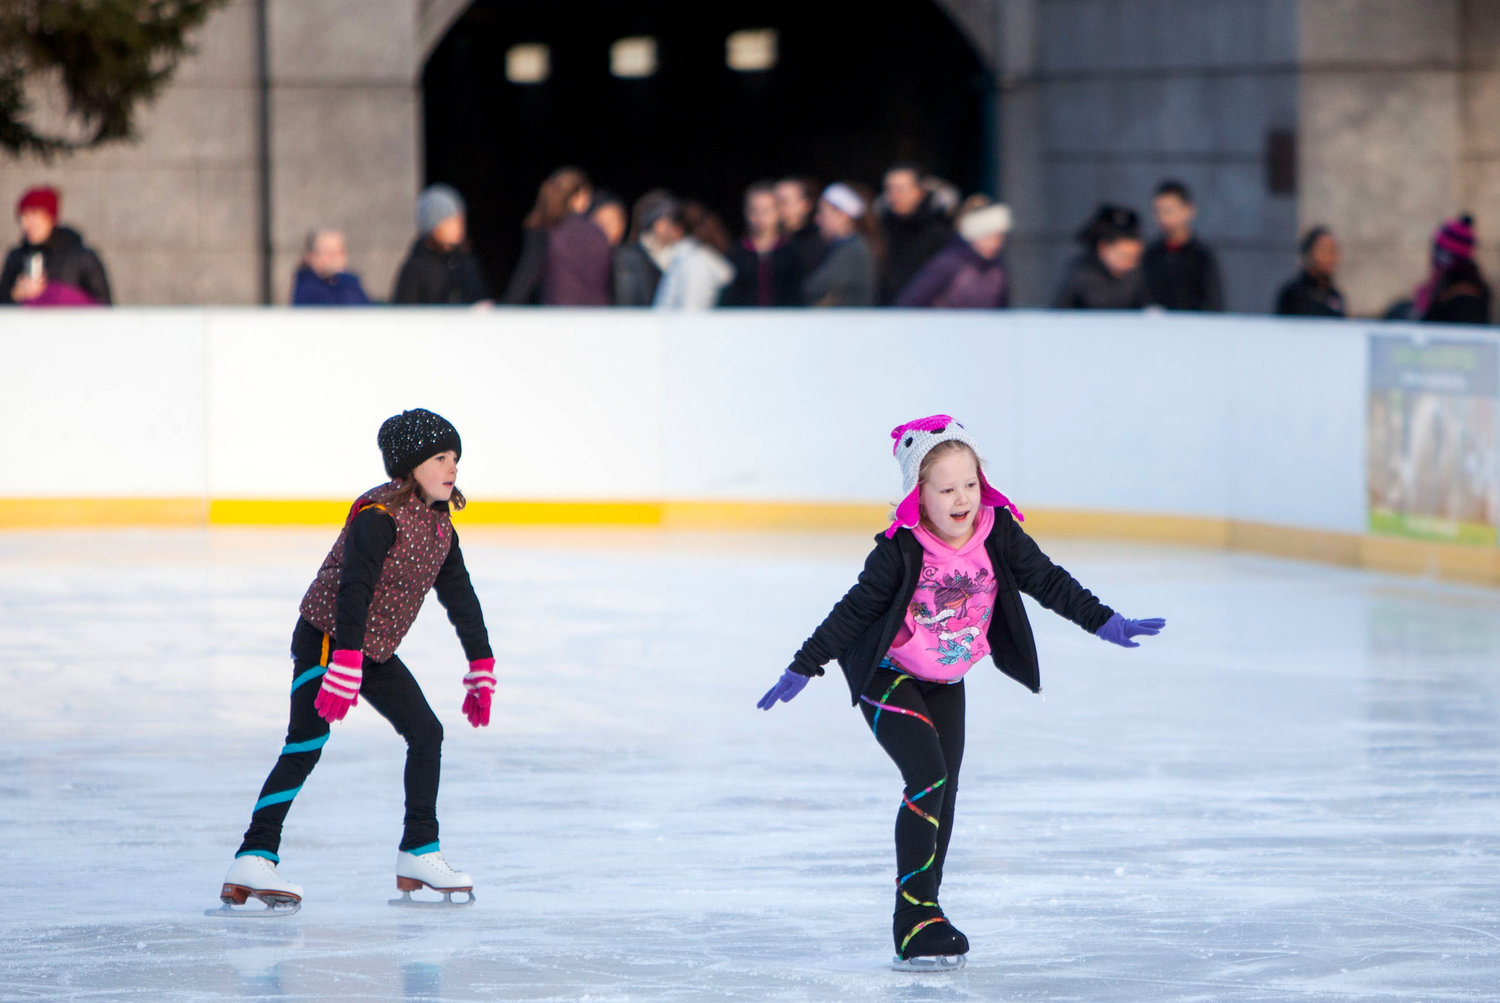 Stick around for a skating program following the BankNewport City Center tree lighting